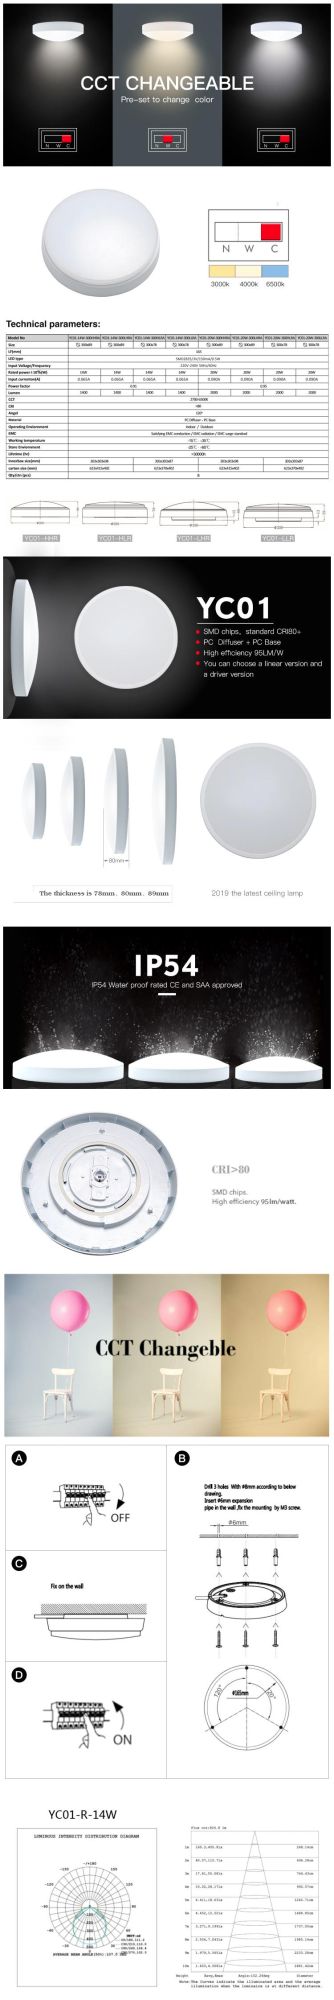 New Lighting Fuxture Customizable Yc01 UL Approved Outdoor Light LED Ceiling Lamp